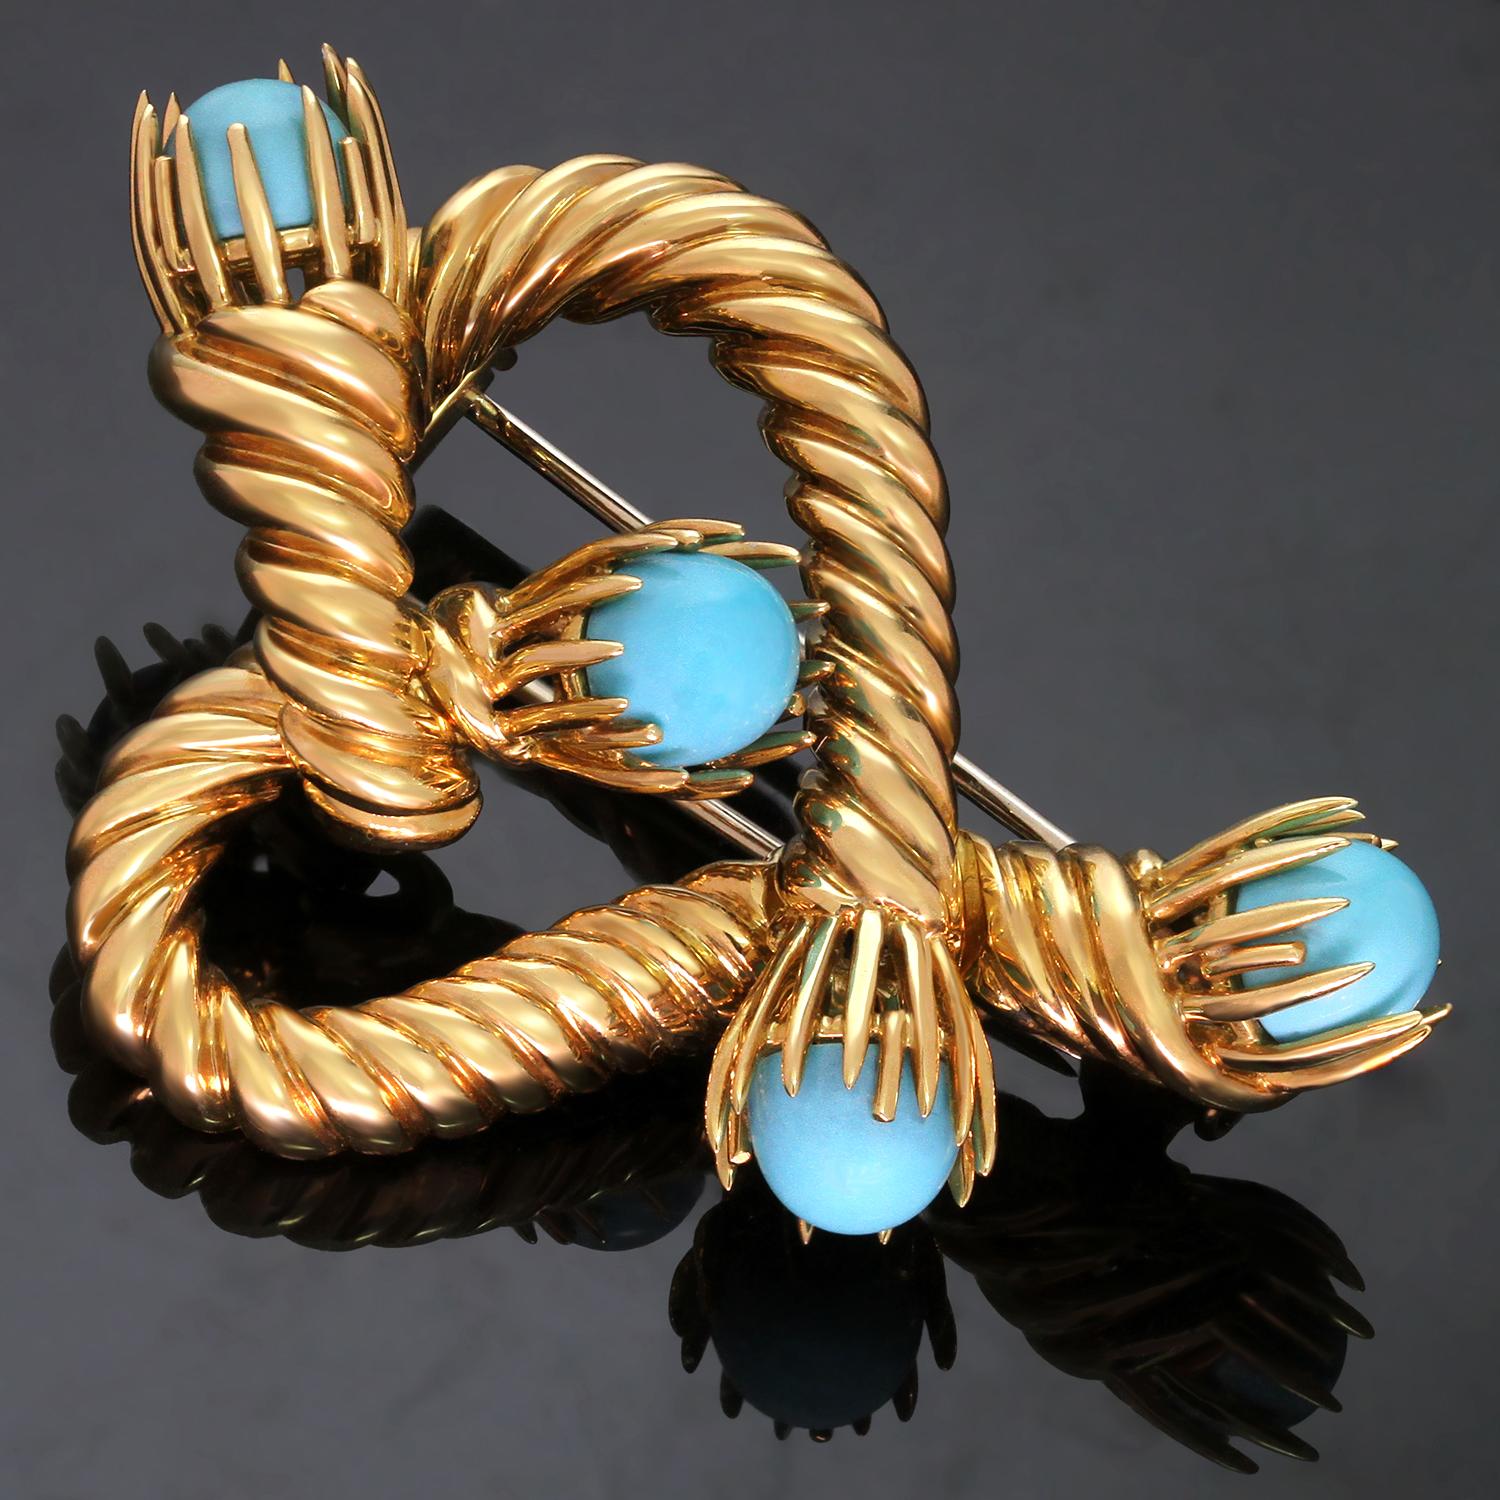 This classic Tiffany & Co. brooch features a gorgeous heart-shaped design by Schlumberger crafted in 18k yellow gold and set with 4 turquoise stones. Made in United States circa 2000s. Measurements: 1.49